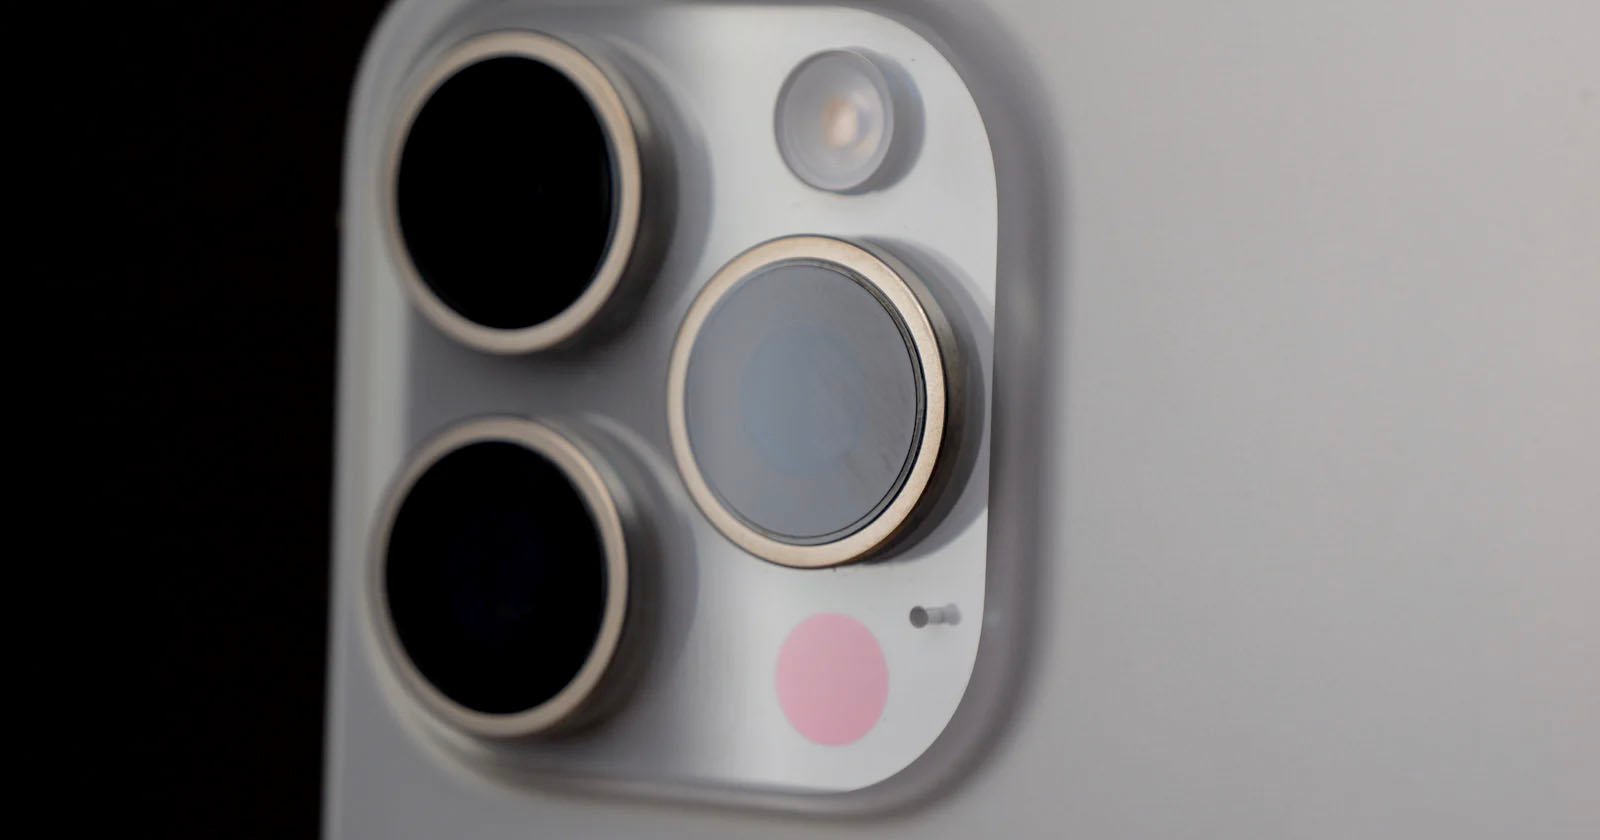 Apple Wants to Take Camera Sensor Design In-House: Report